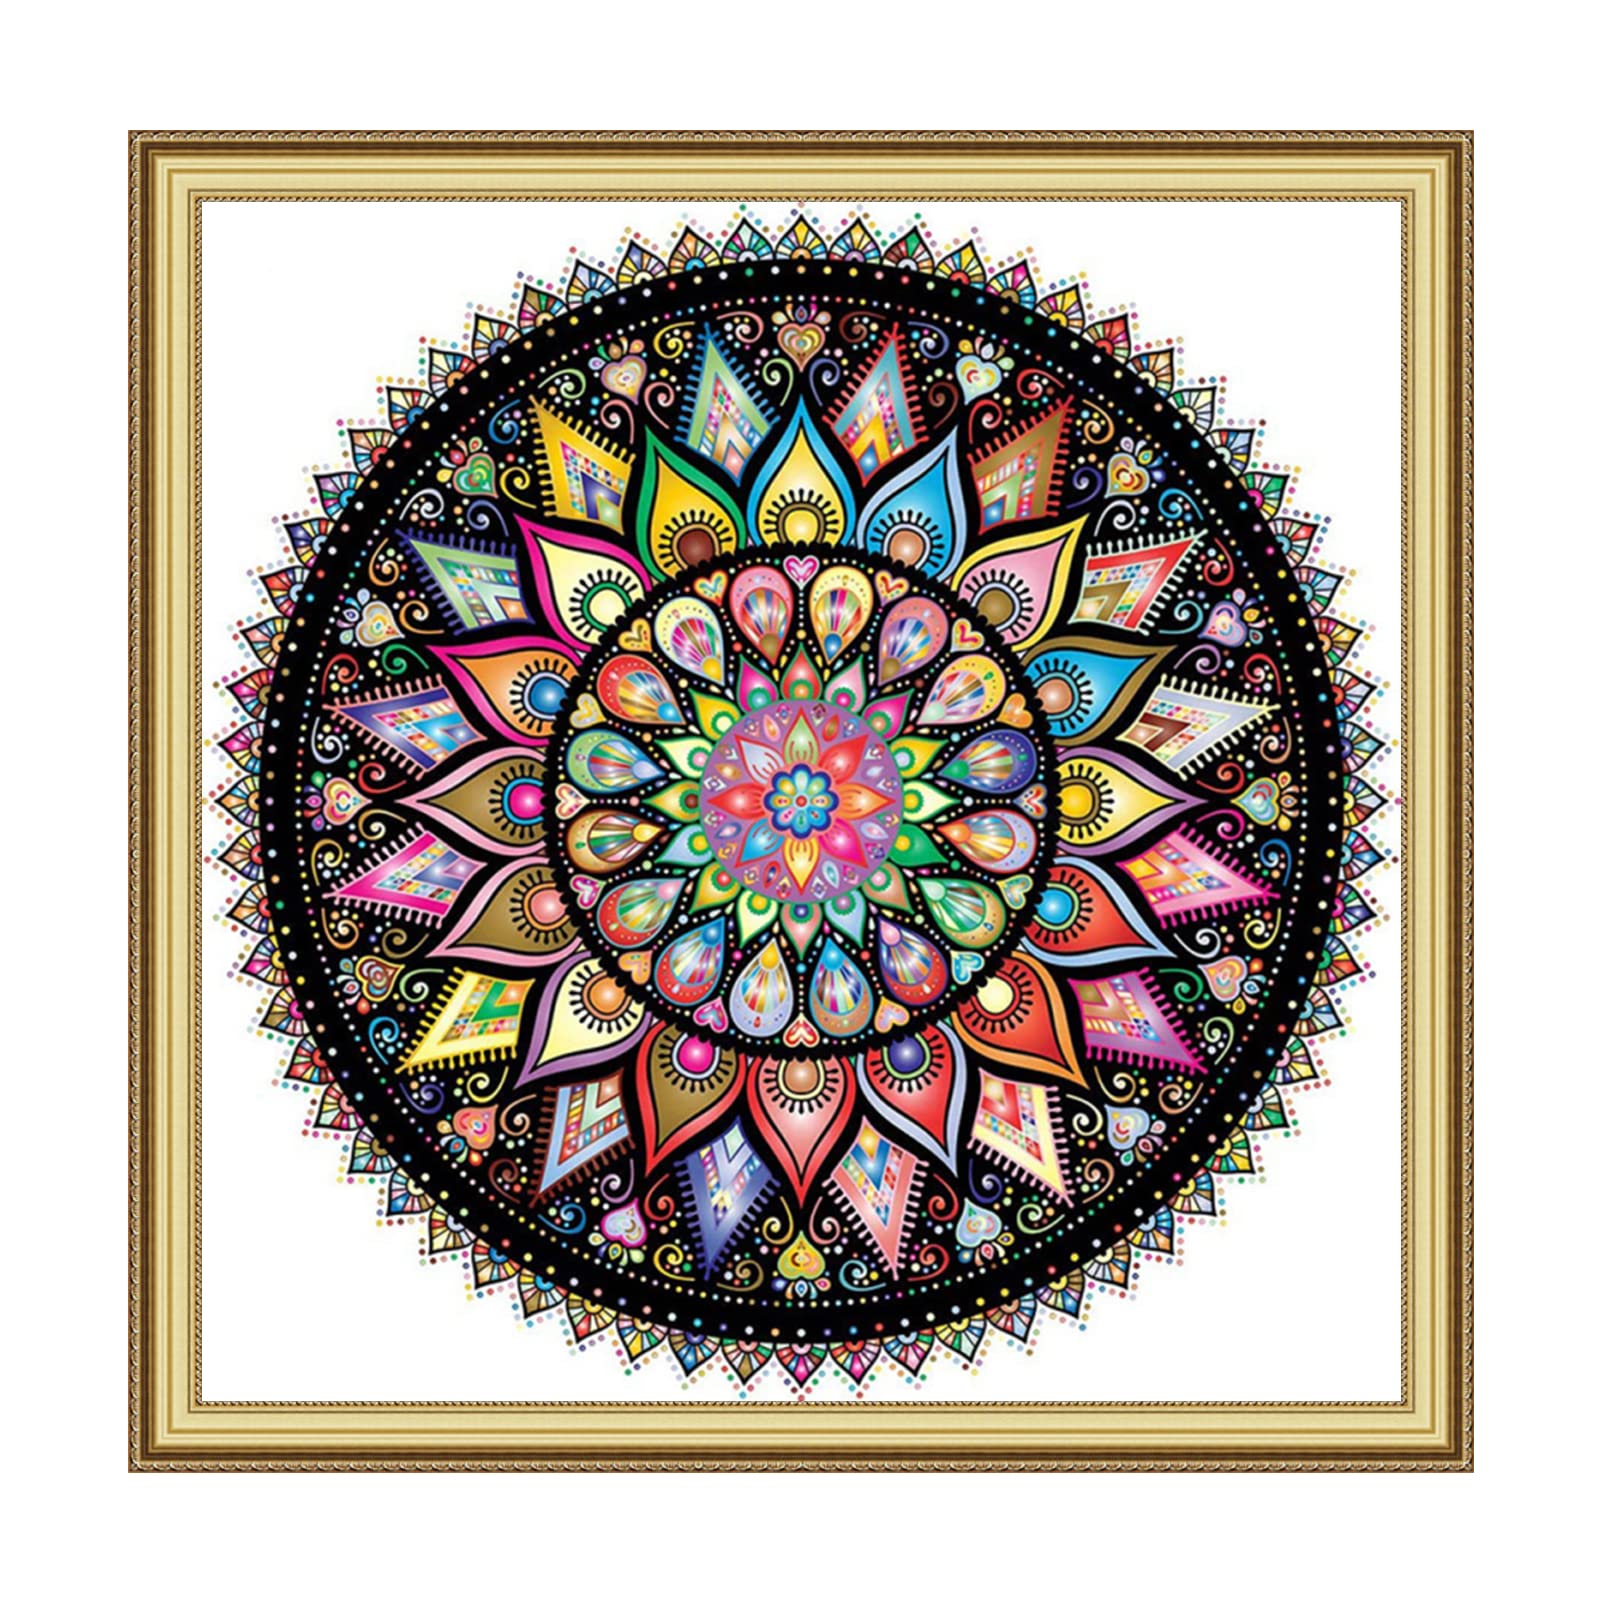 Findvoor Stamped Cross Stitch Kits for Beginners Full Range of Cross  Stitching Embroidery Pattern for Kids or Adults 11CT DIY Needlepoint  Embroidery Starter Kits-Magic Mandala 17.7 17.7 inch